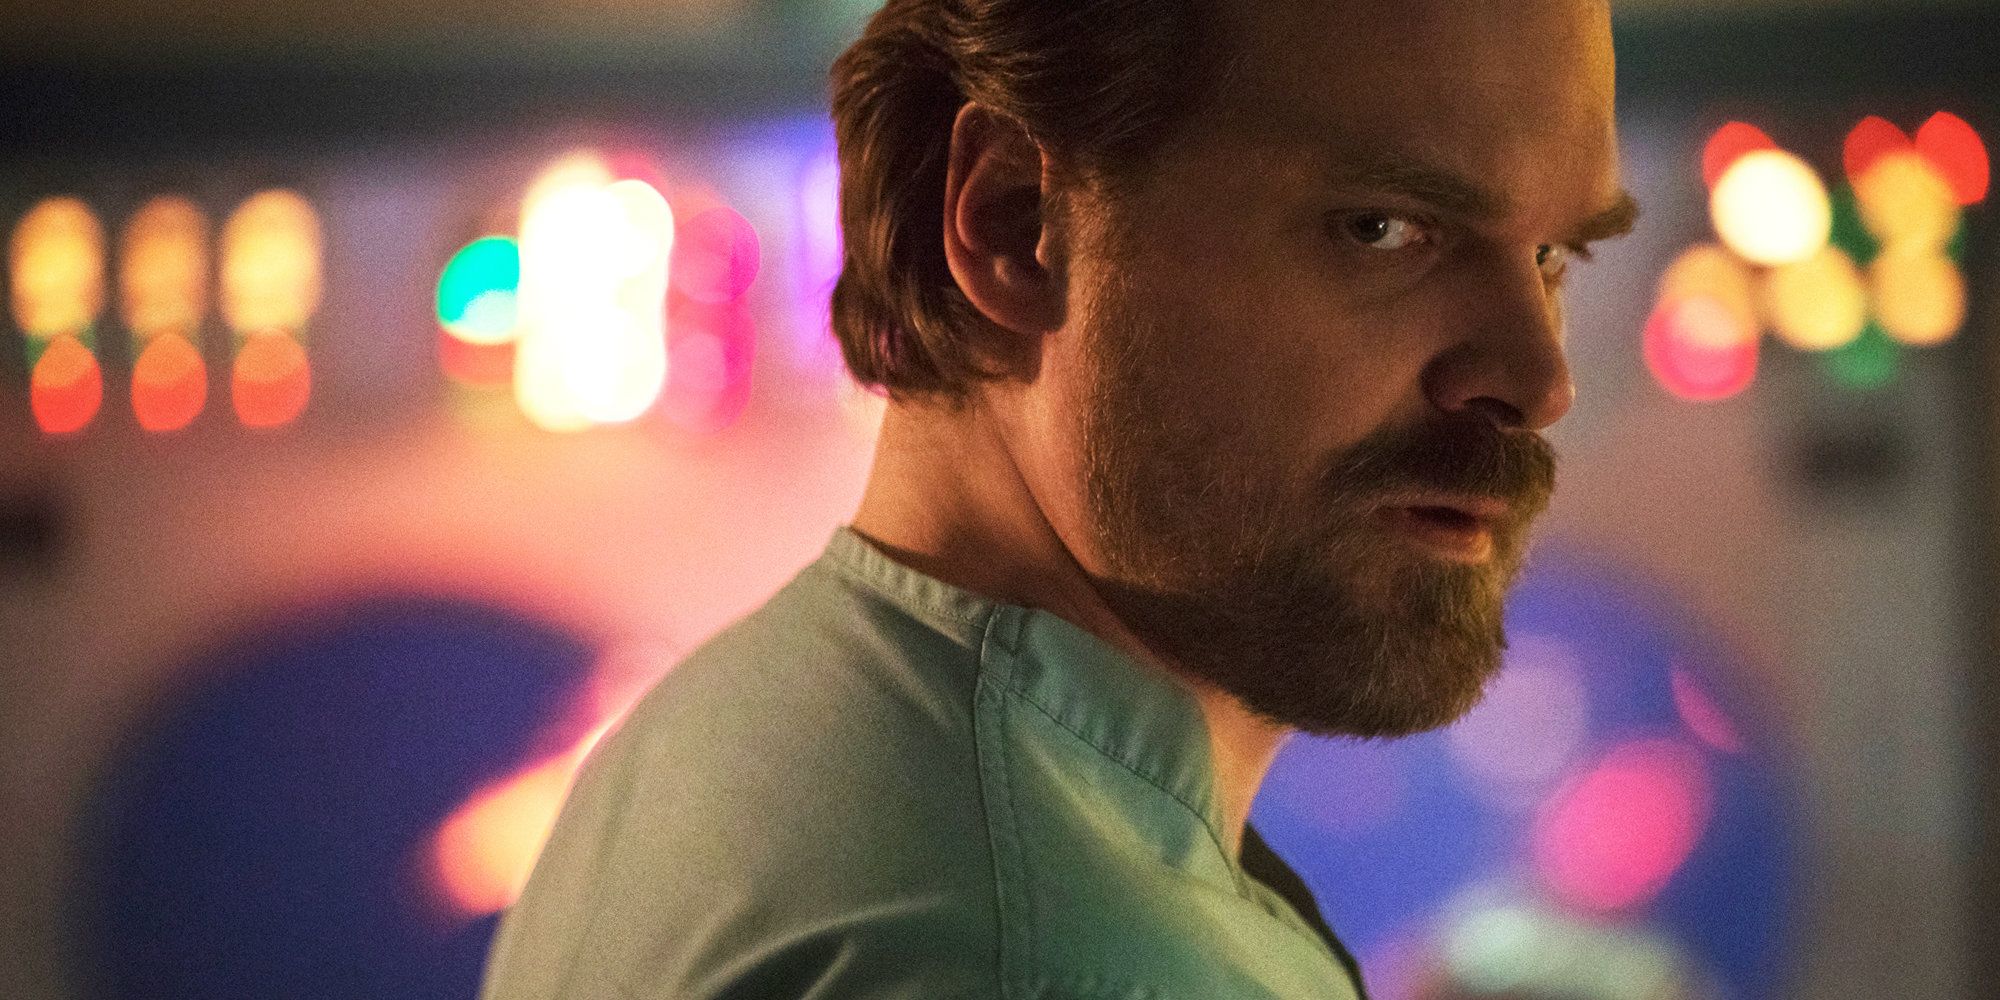 David Harbour as Hopper looking on with hesitation